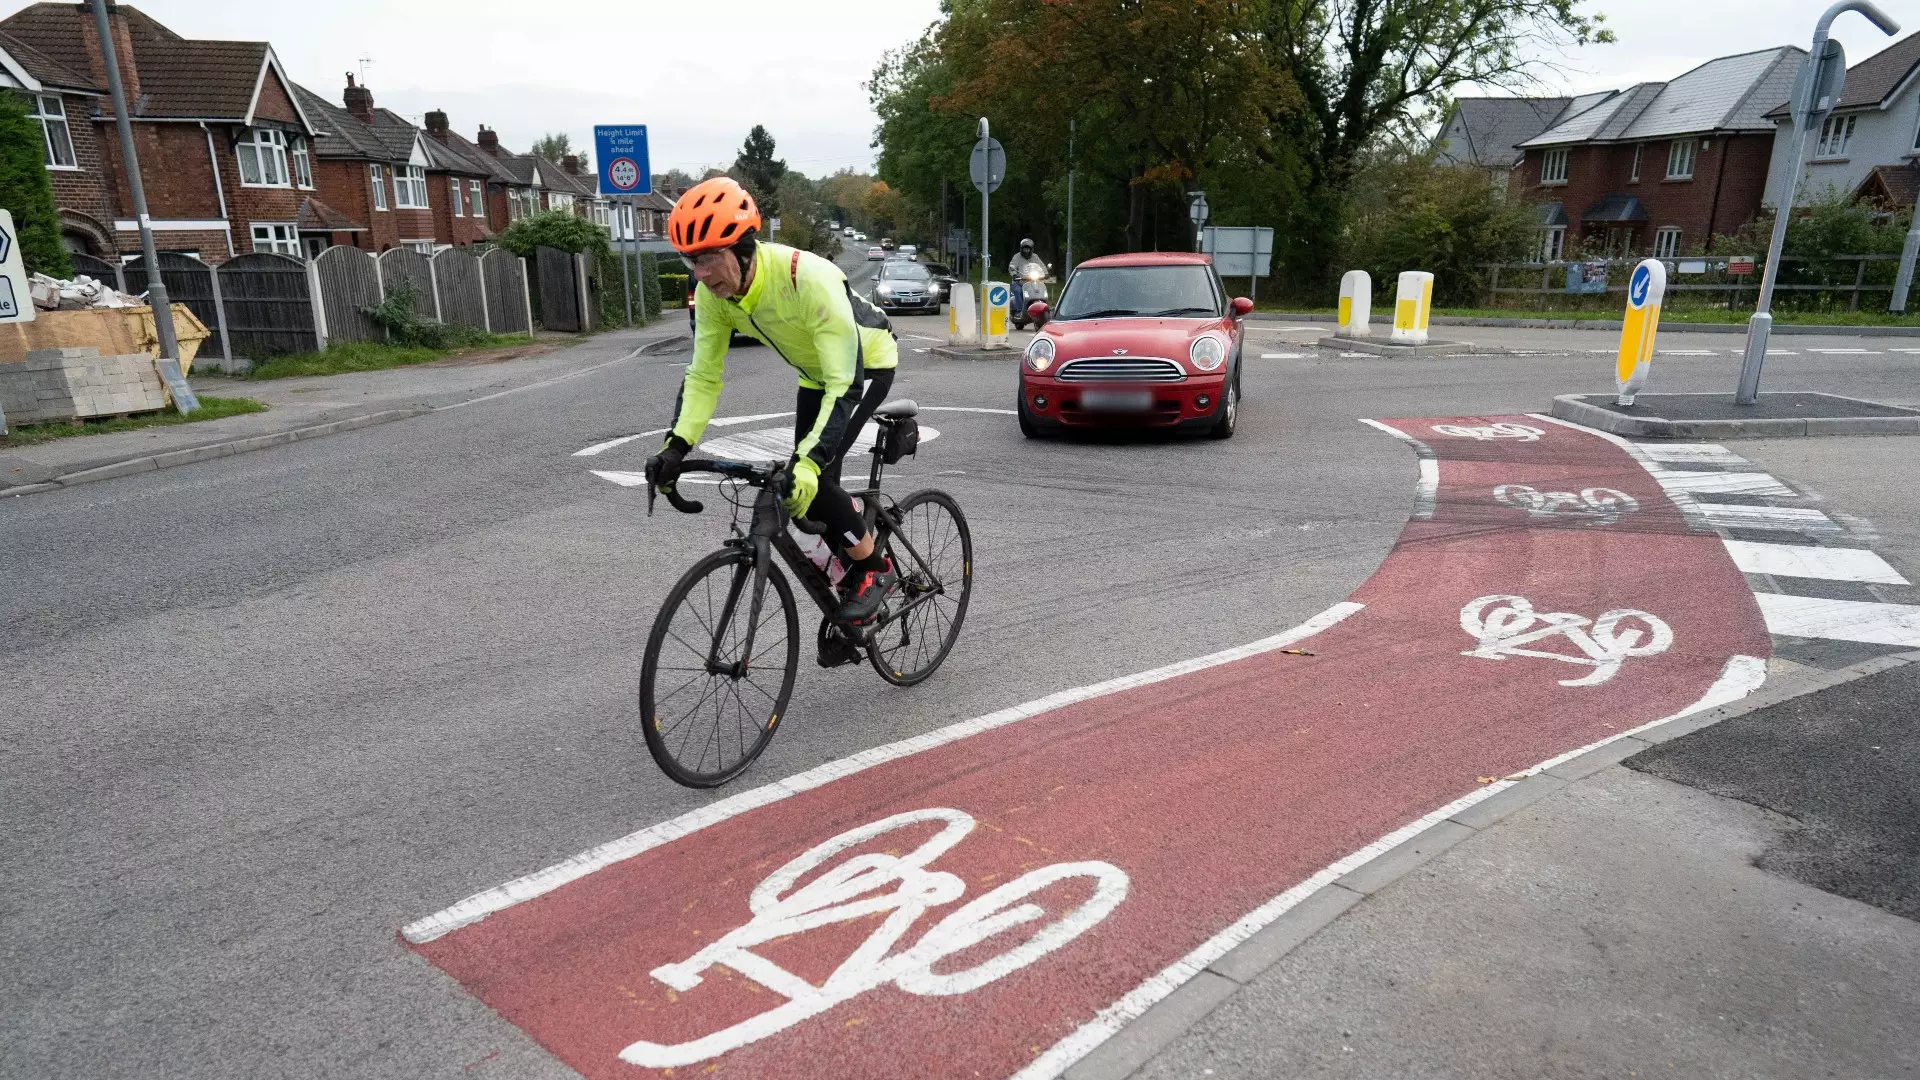 Council Slammed For 'Most Pointless Cycle Lane In UK' That's 10ft Long